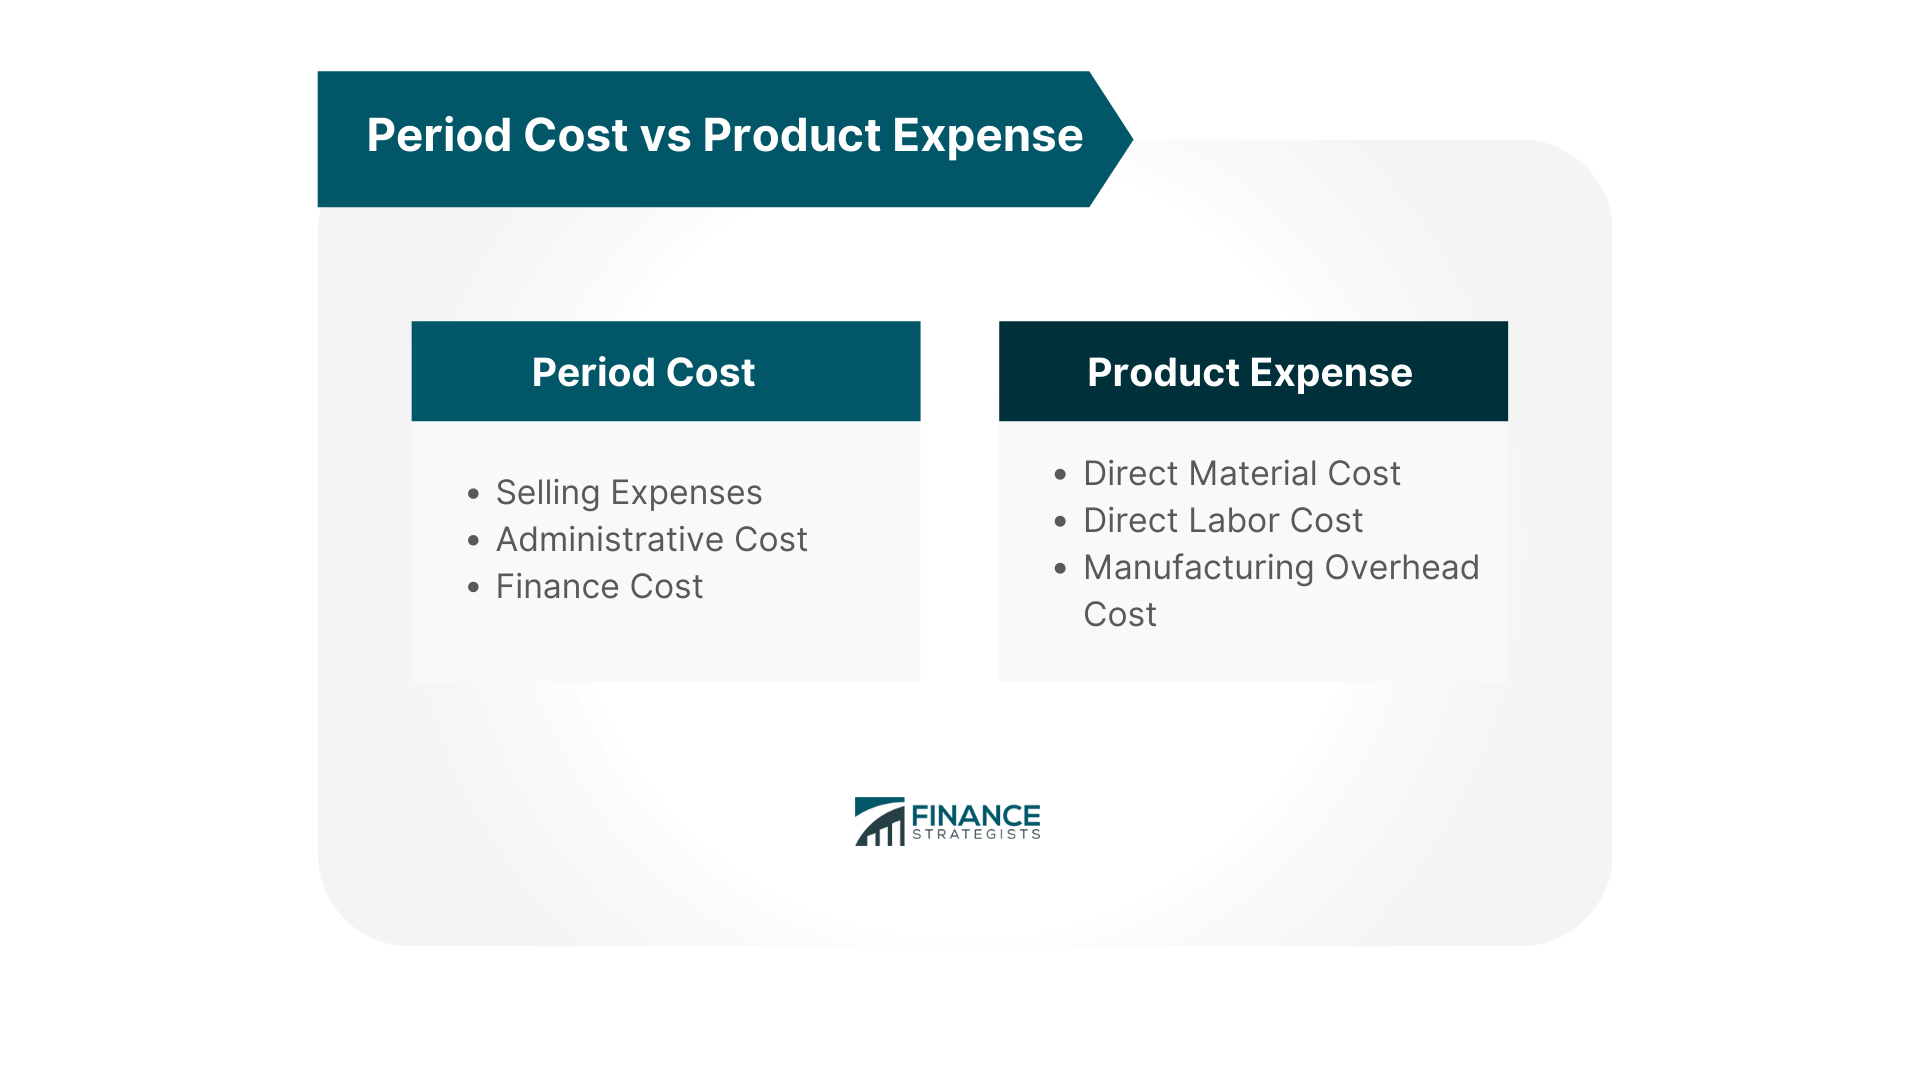 Period Cost vs Product Expense